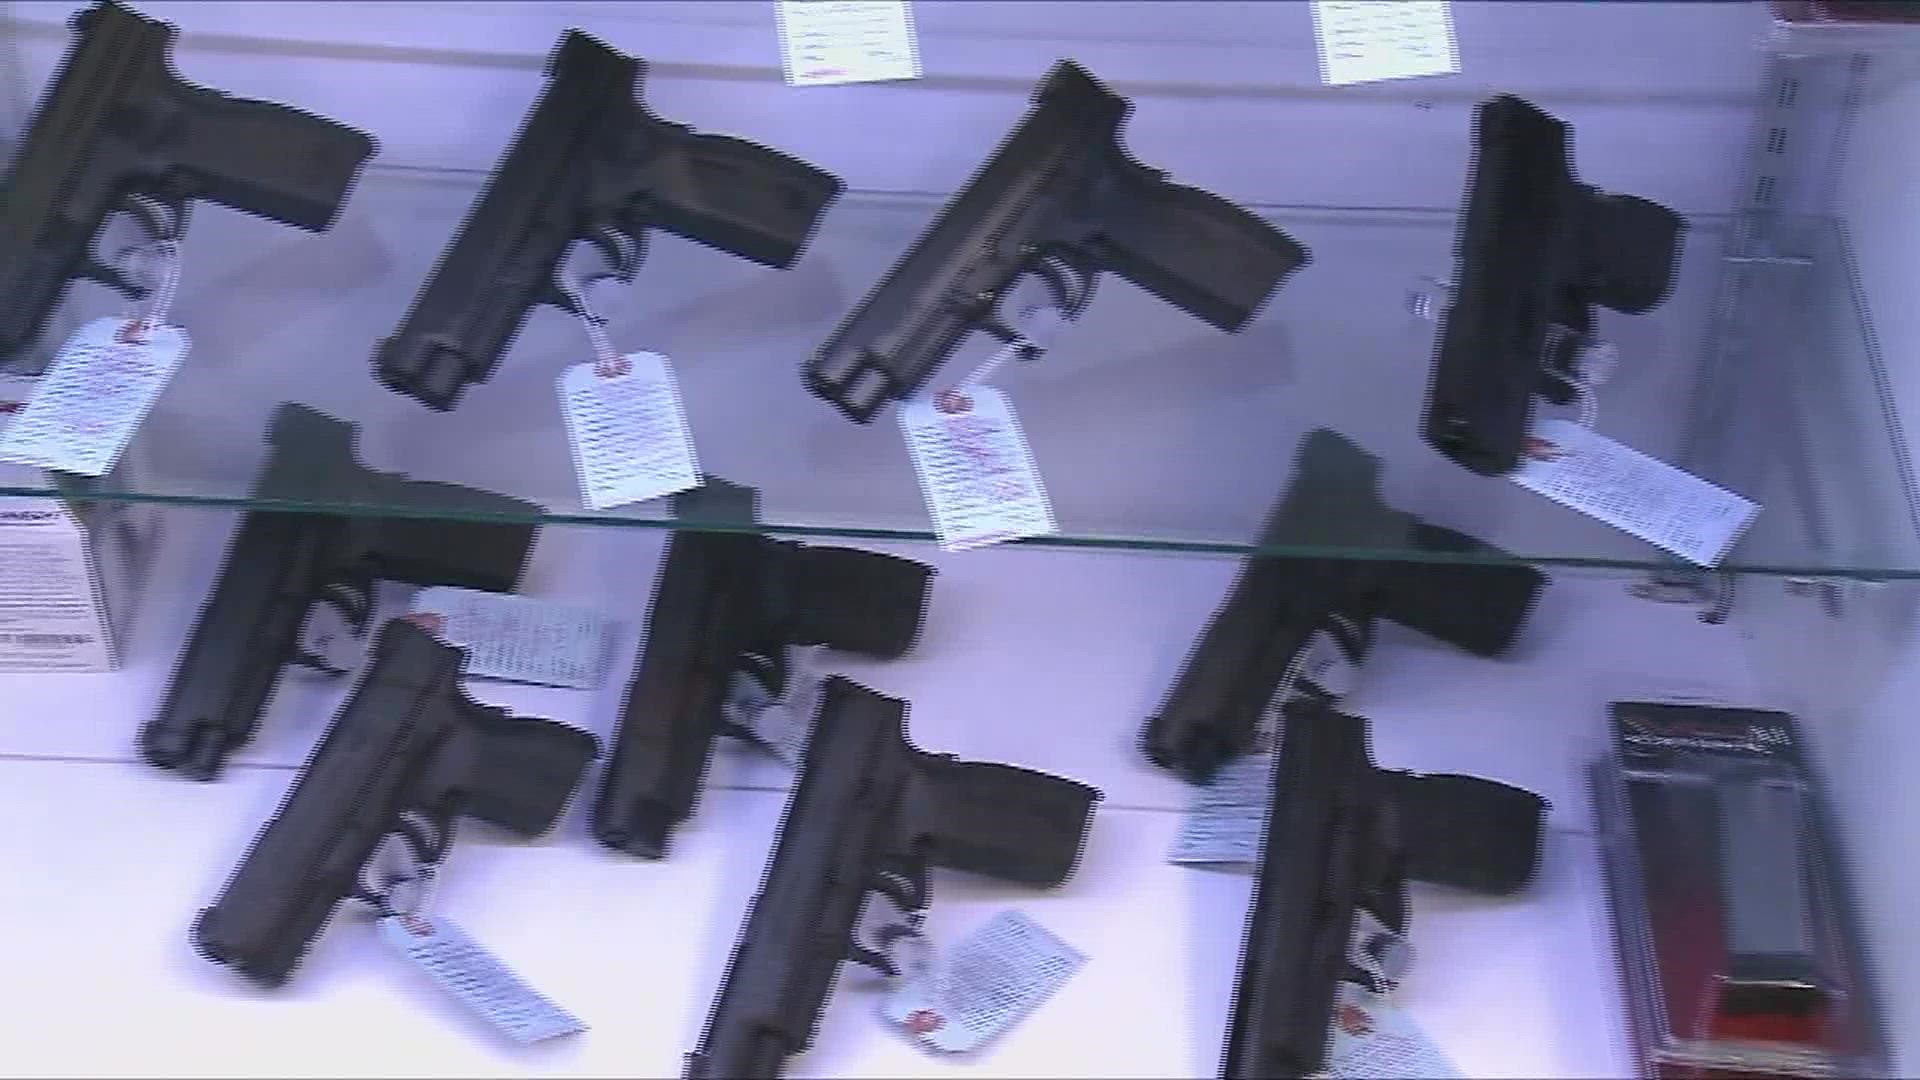 "60% of all the crime-related guns used in Chicago are trafficked in from out of state," said Rep. Sean Casten.